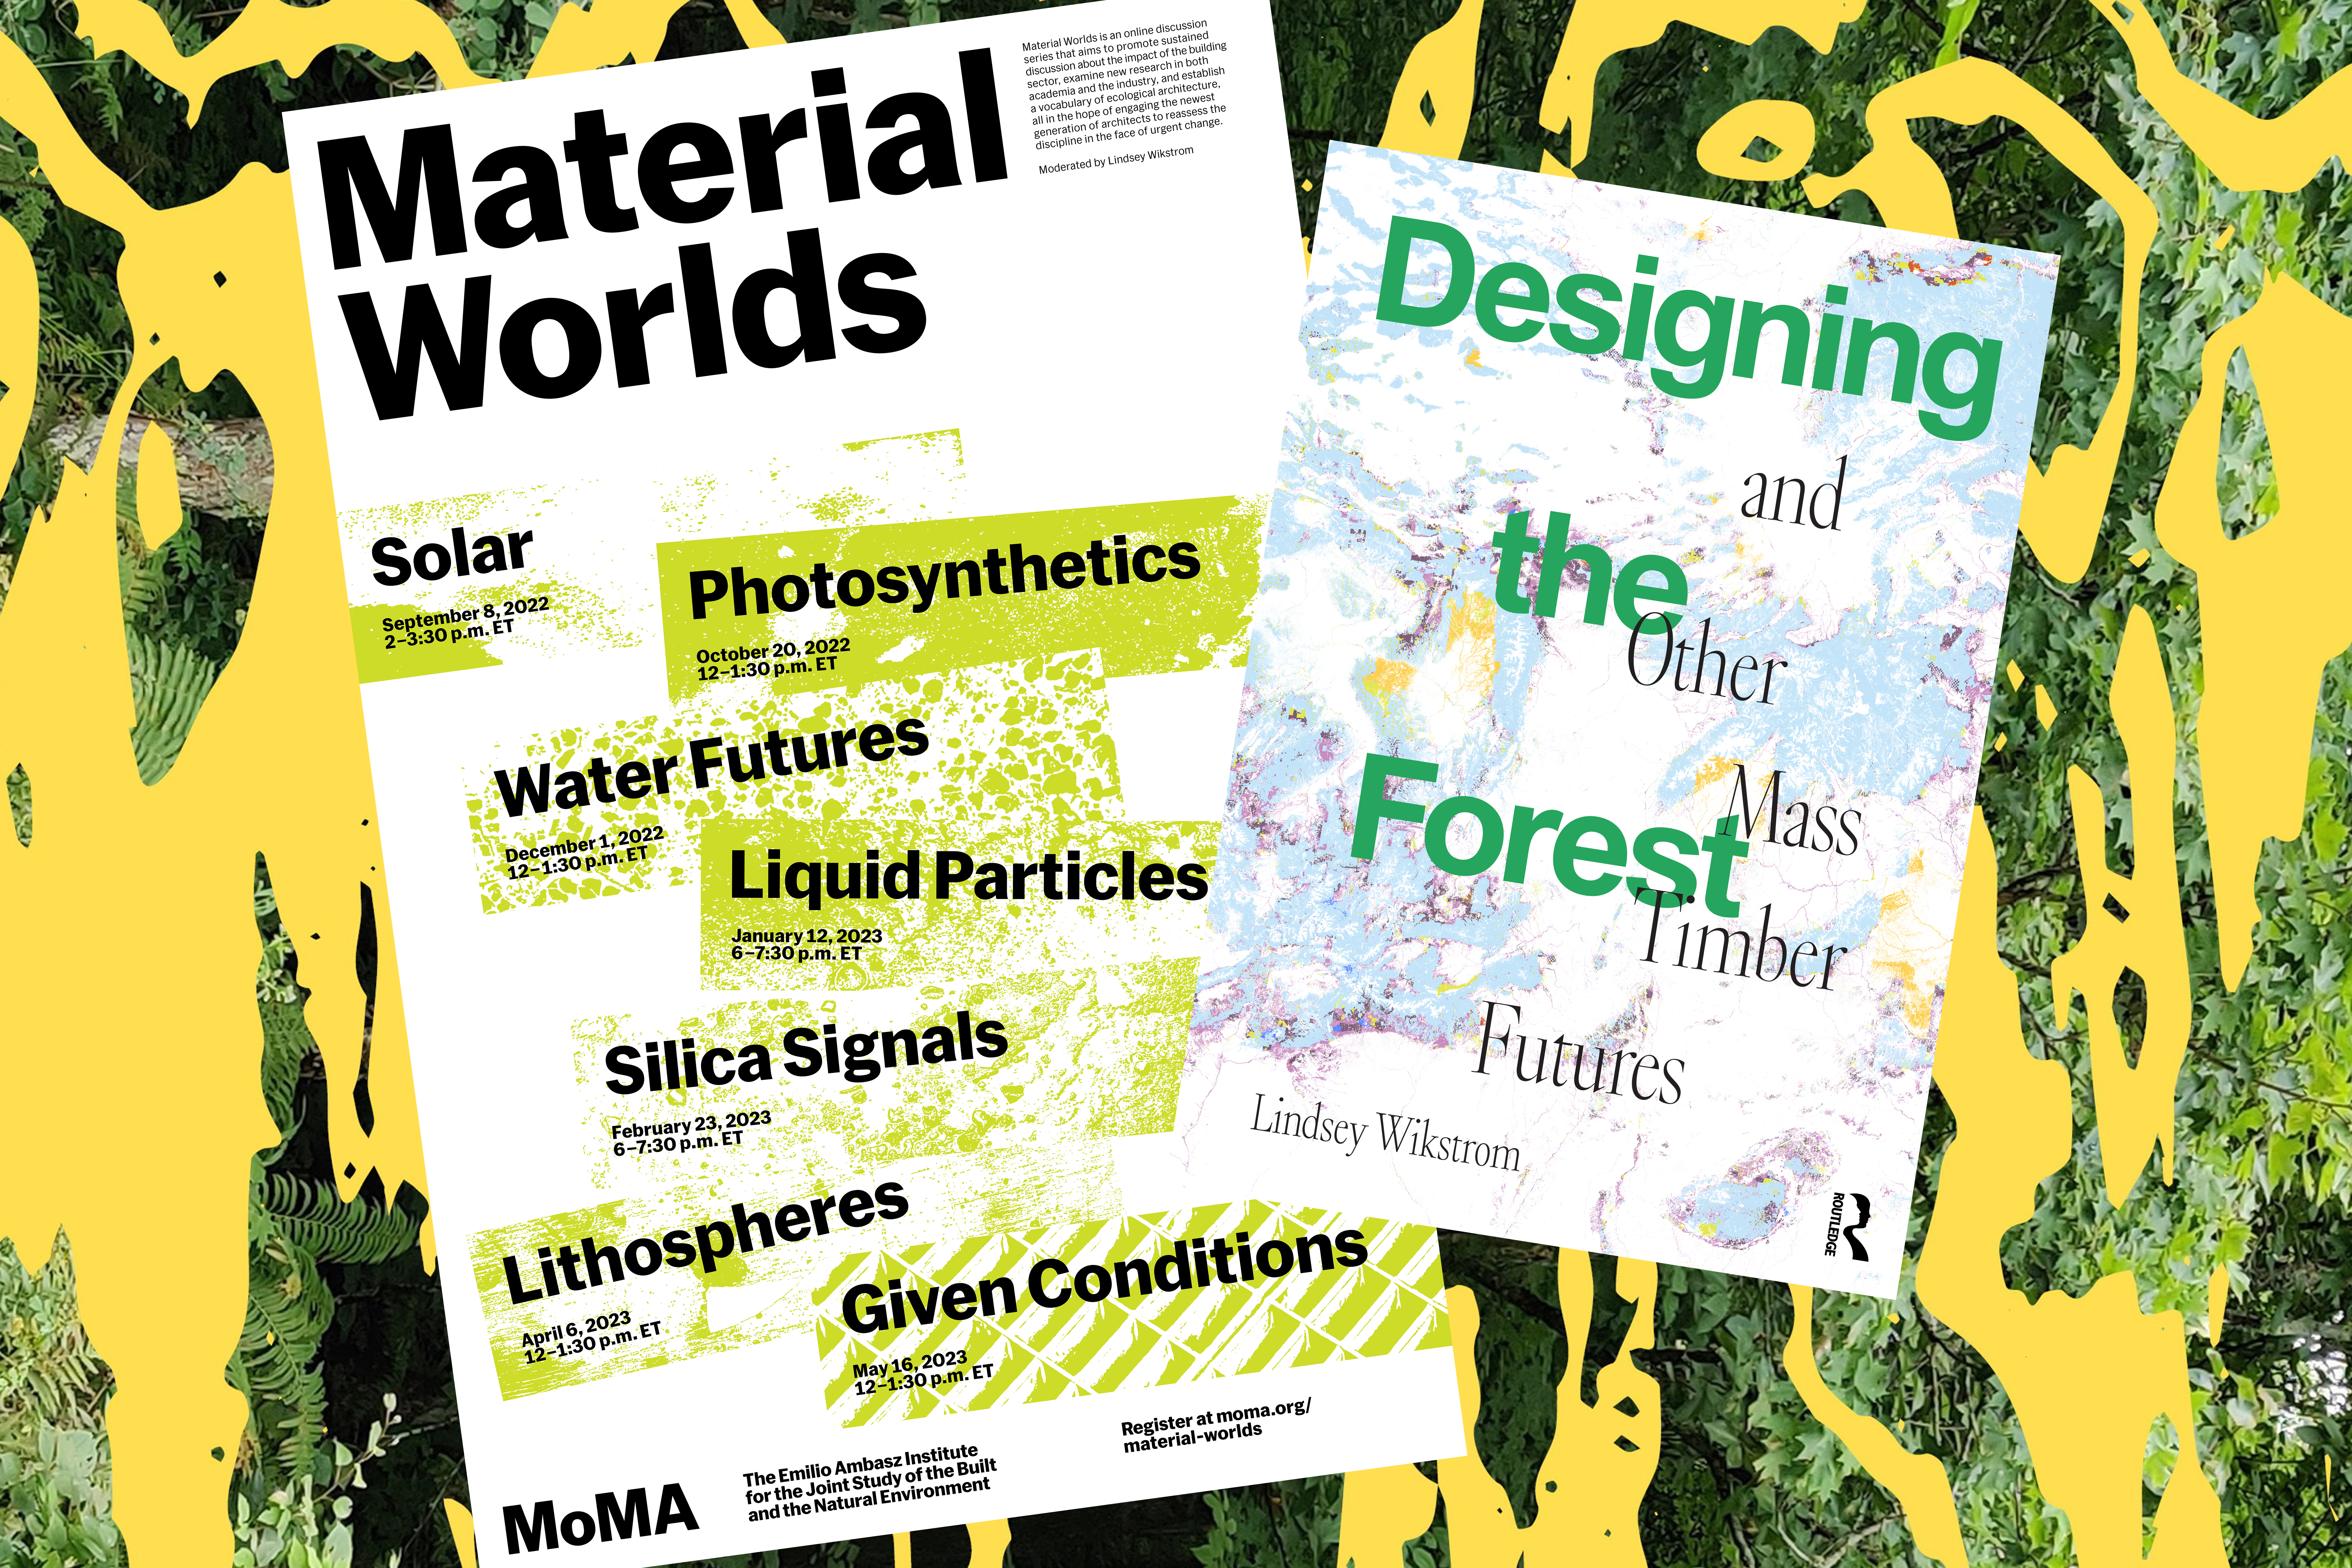 Material Worlds lecture series posts and "Designing the Forest and Other Mass Timber Futures" book cover against yellow and green background.